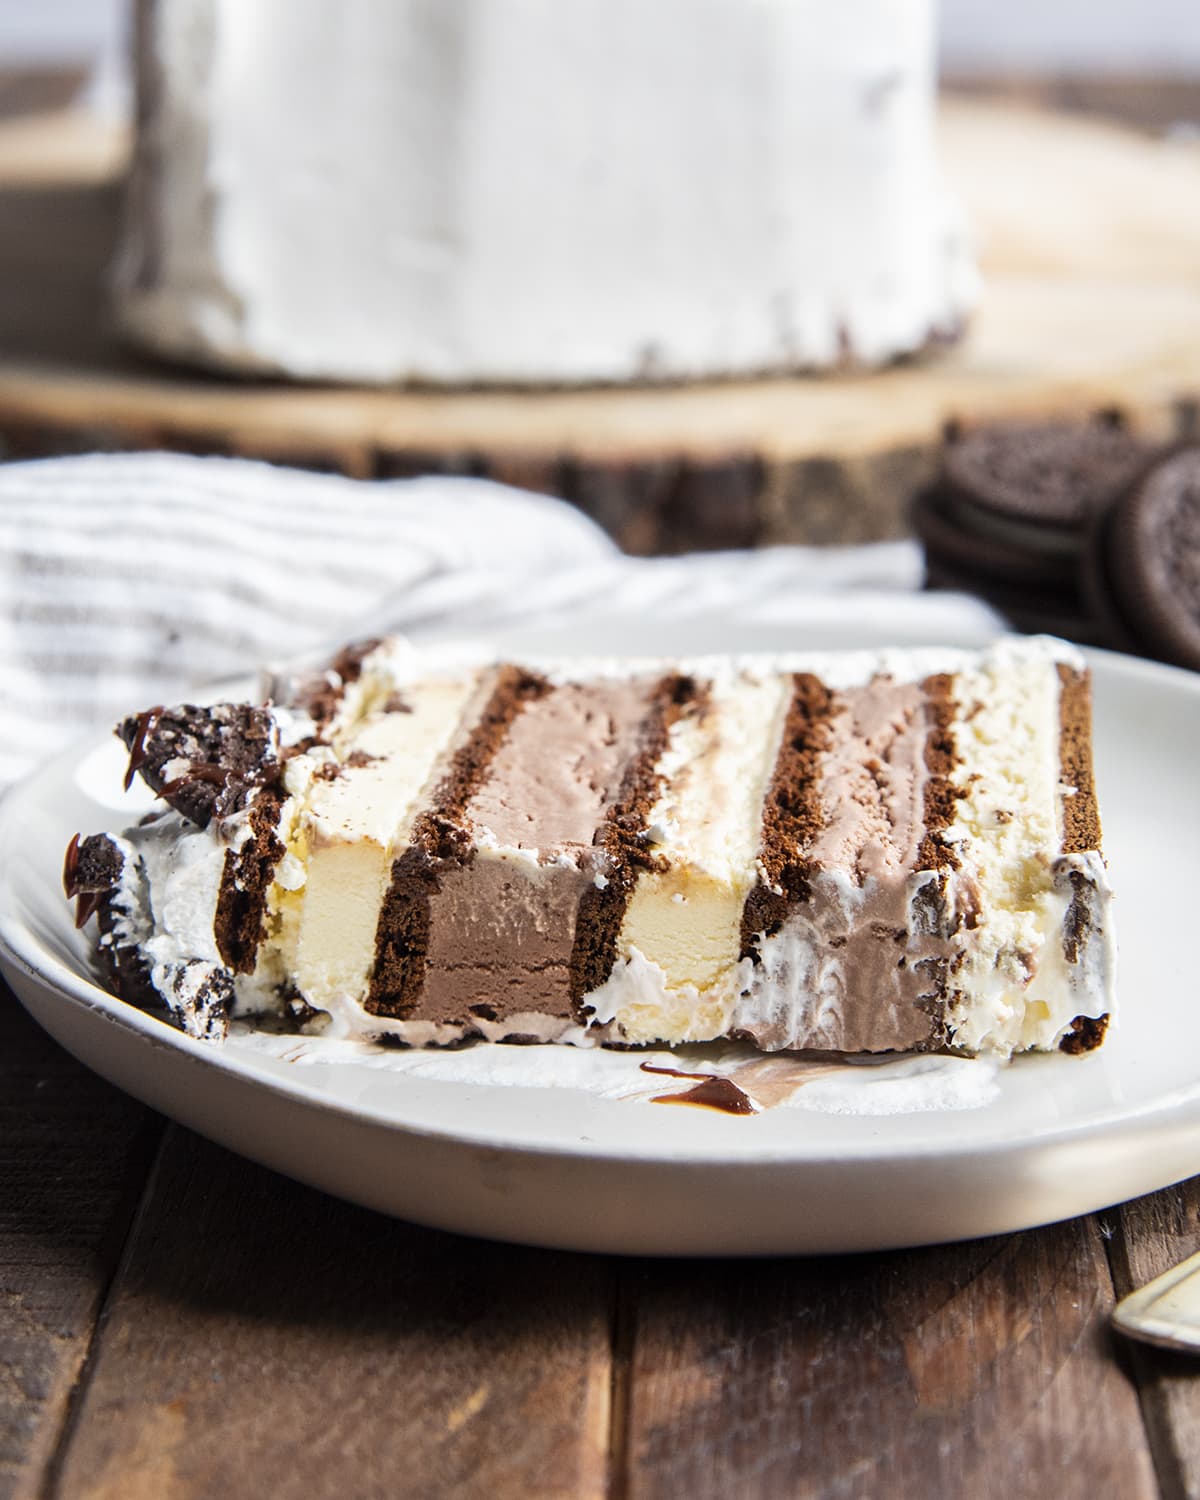 A piece of an ice cream sandwich cake with vanilla ice cream sandwiches, and chocolate ice cream.